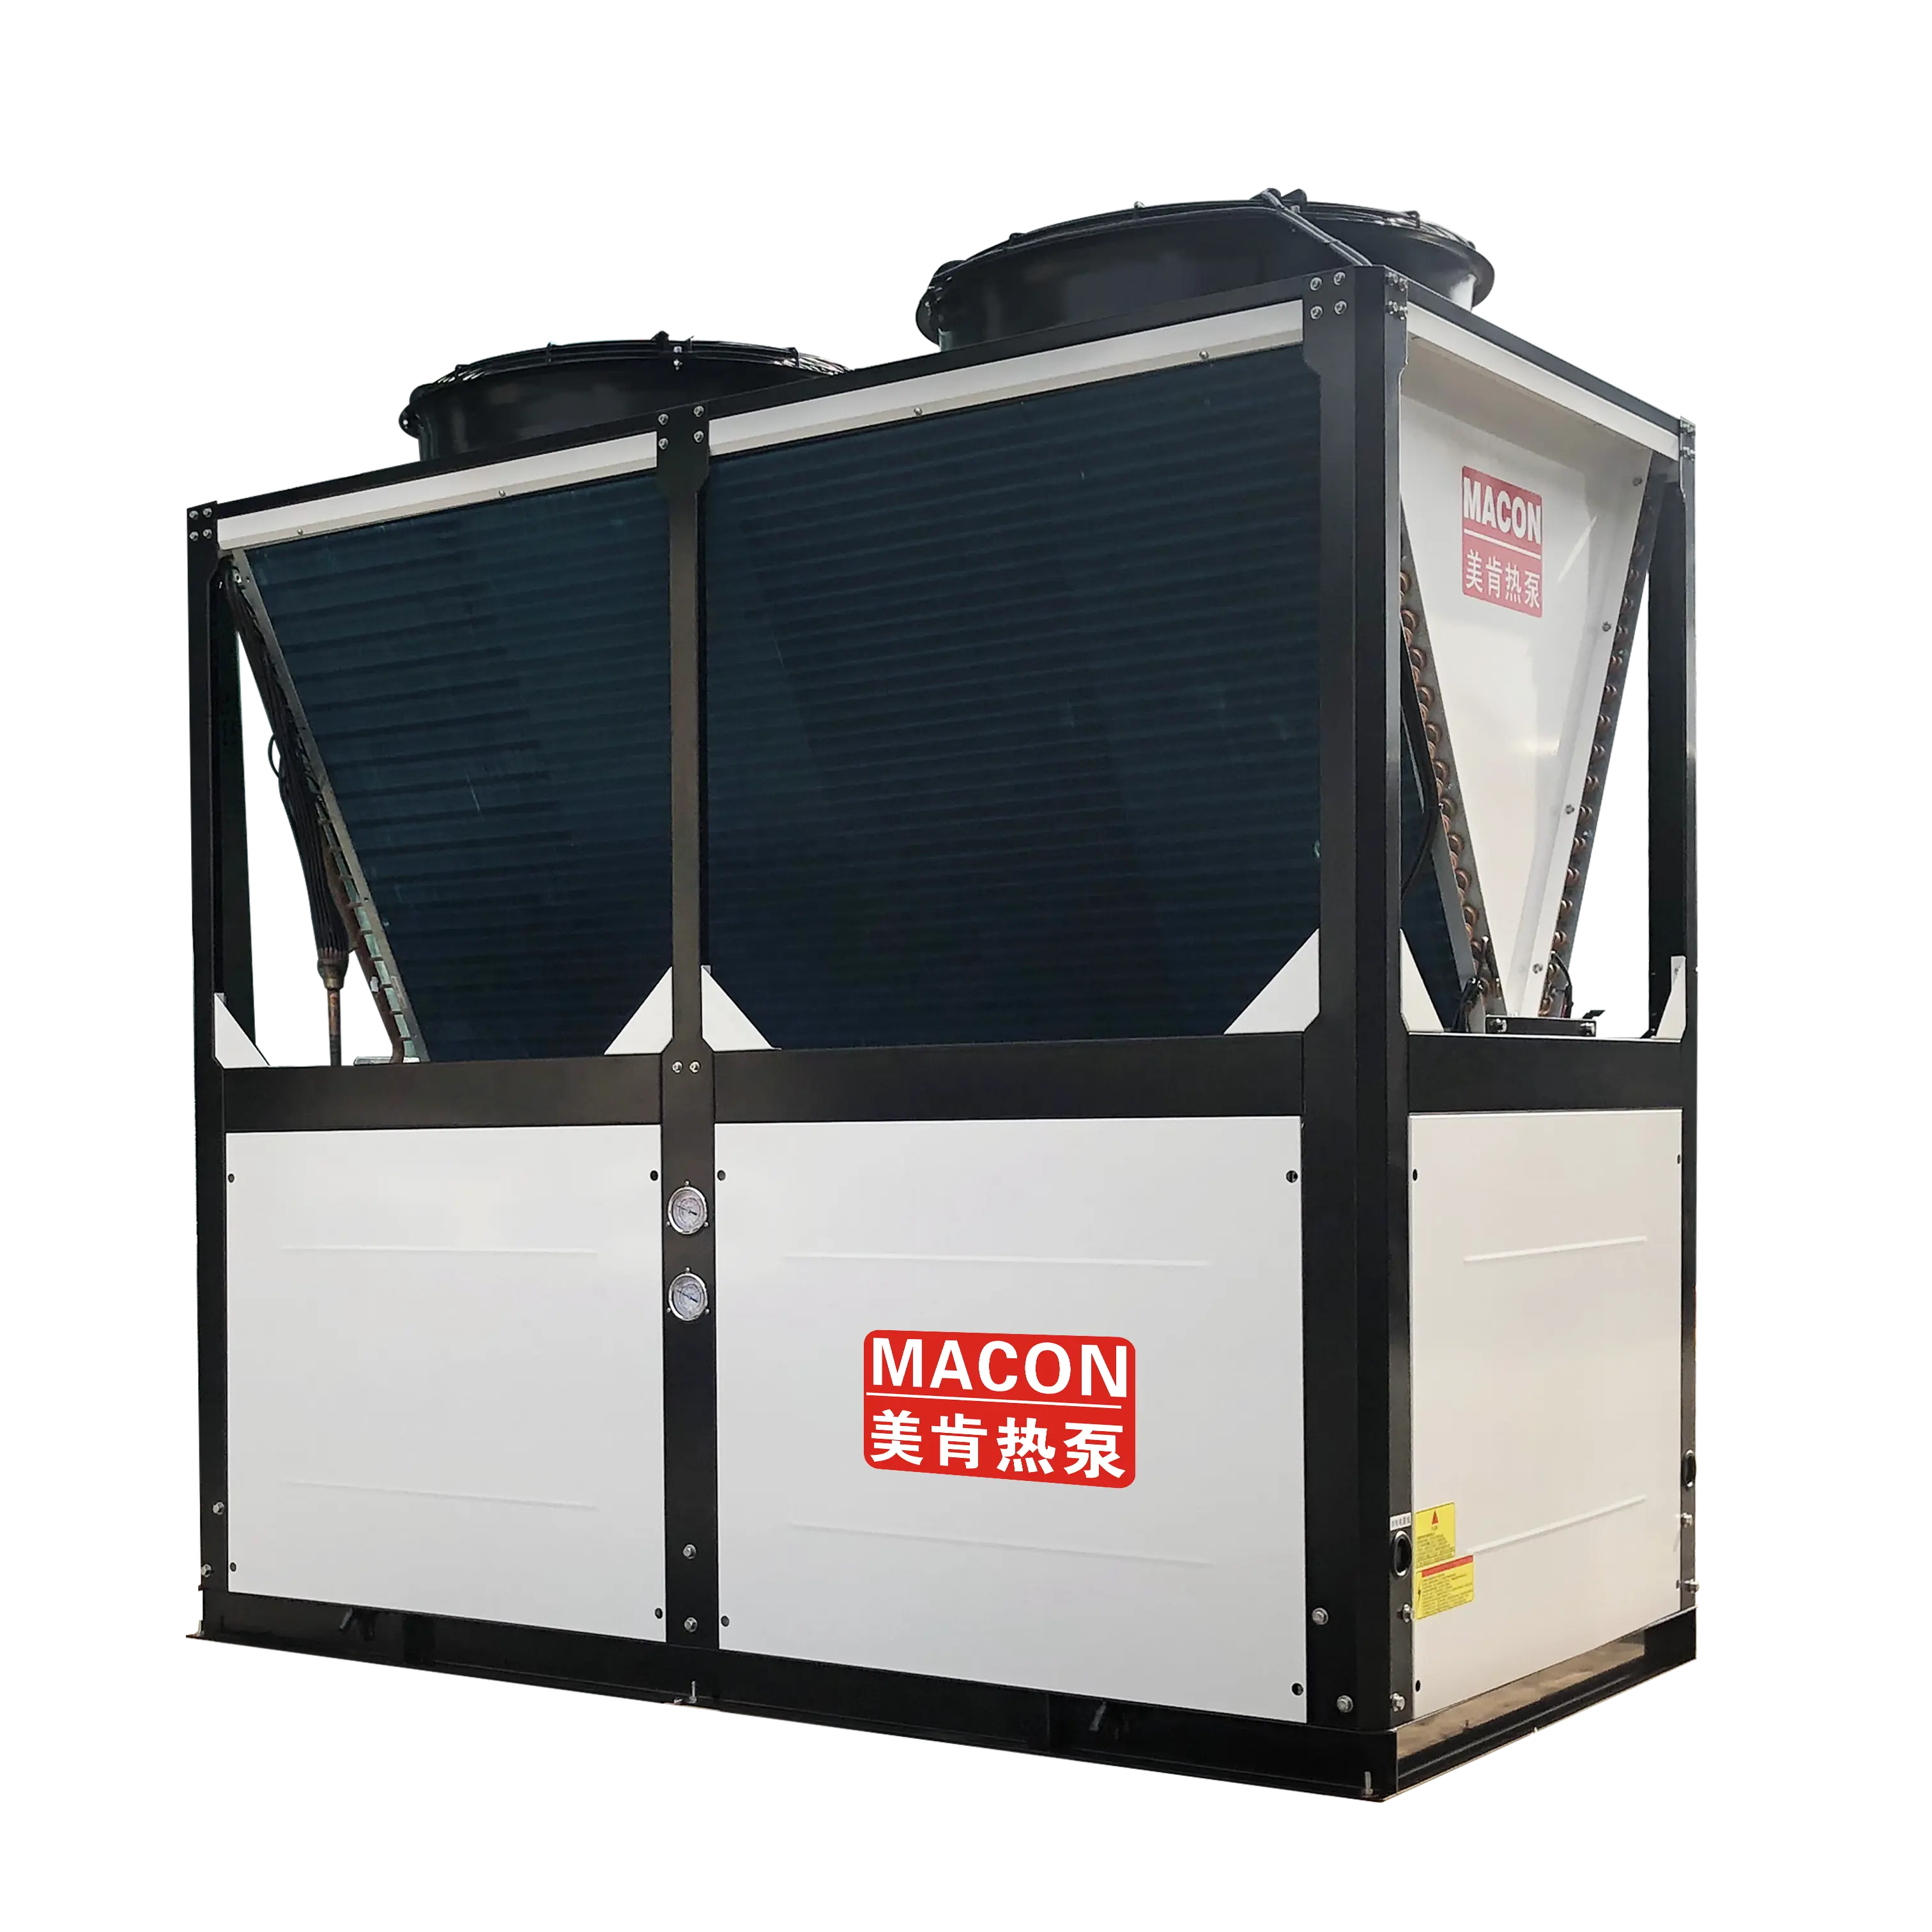 MACON refrigeration equipment water chiller refrigeration equipment commercial industrial water chiller t3 chillers